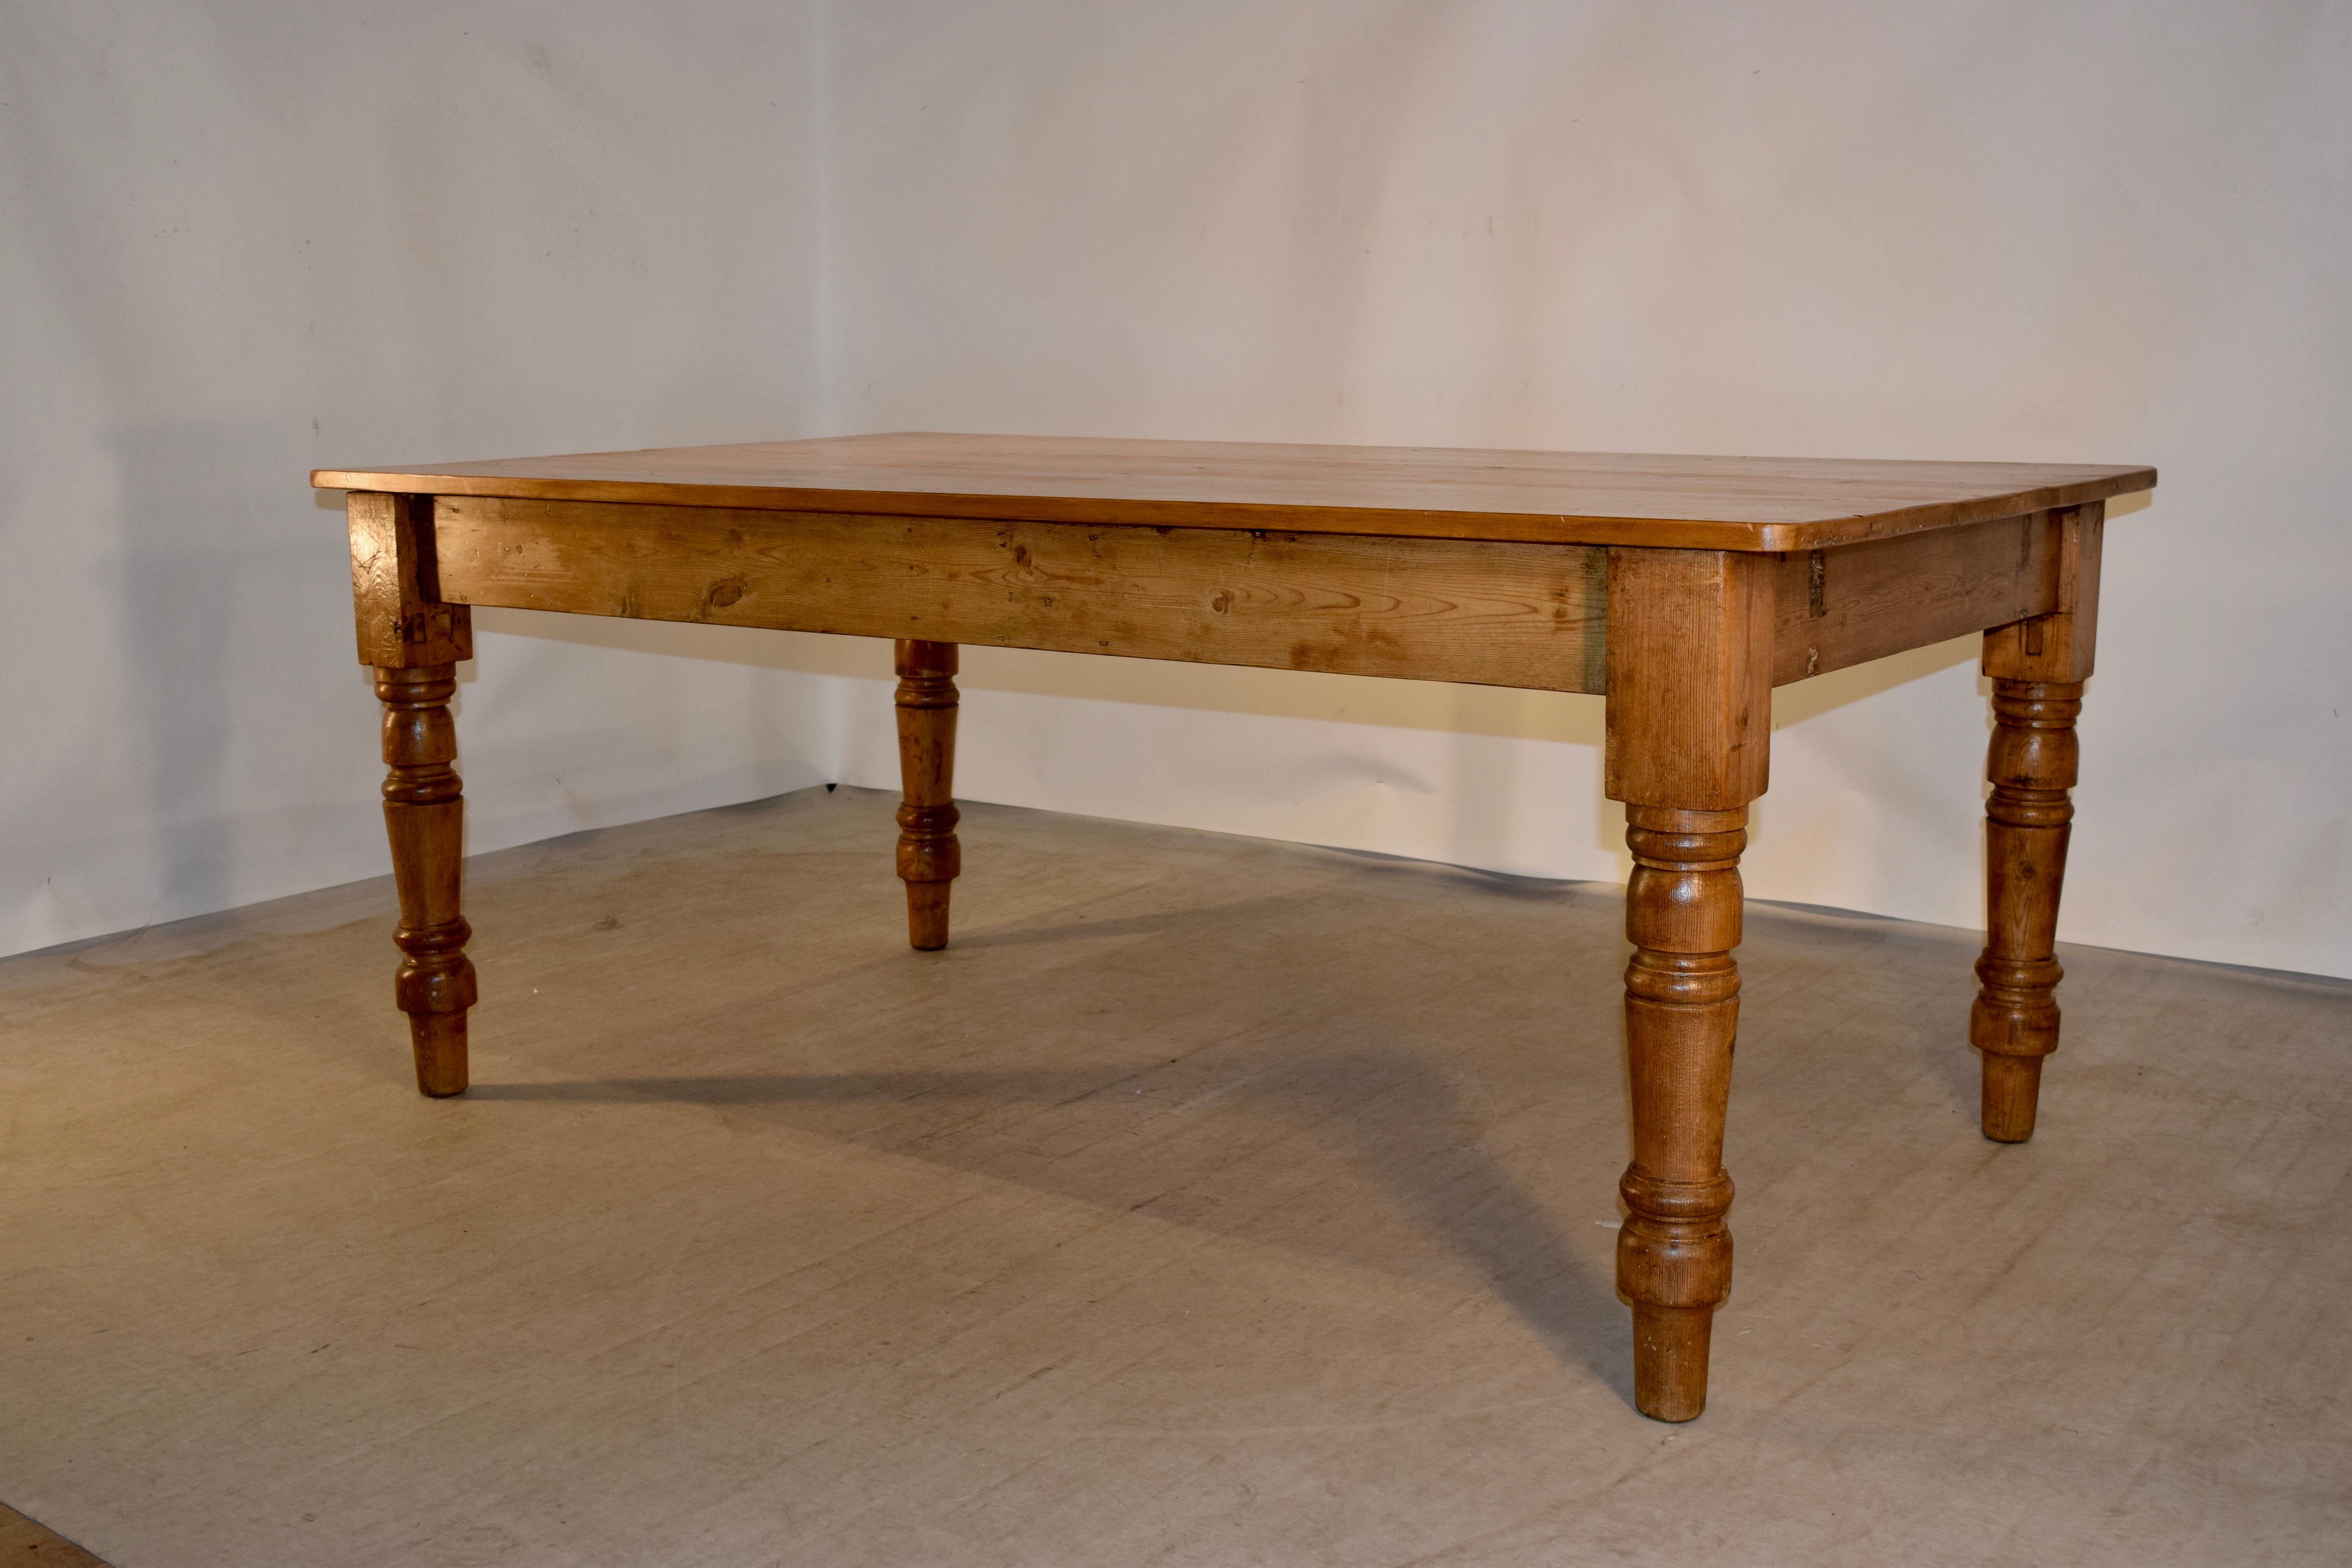 19th century English pine farm table with a plank top and simple apron. The apron height is 24